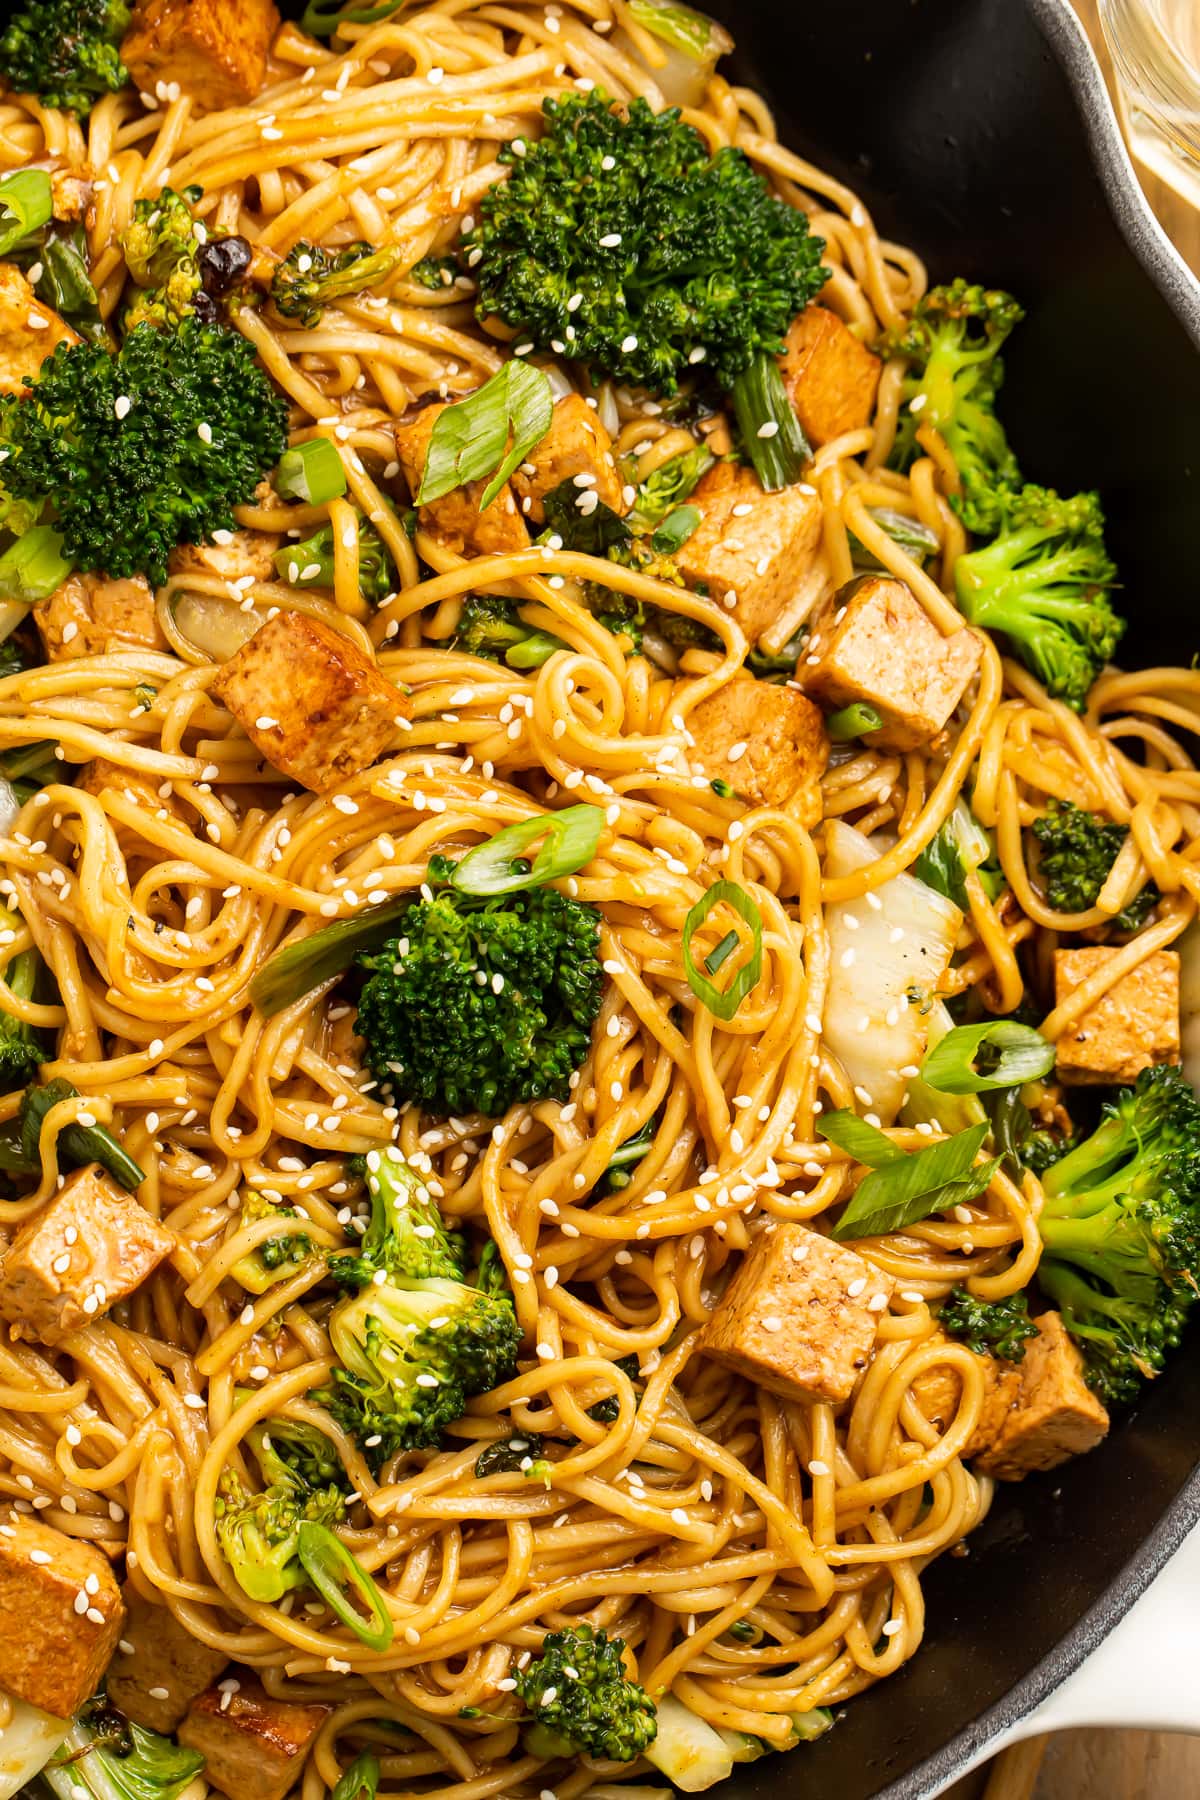 Close-up view of stir fry noodles with tofu and veggies in a cast iron skillet.